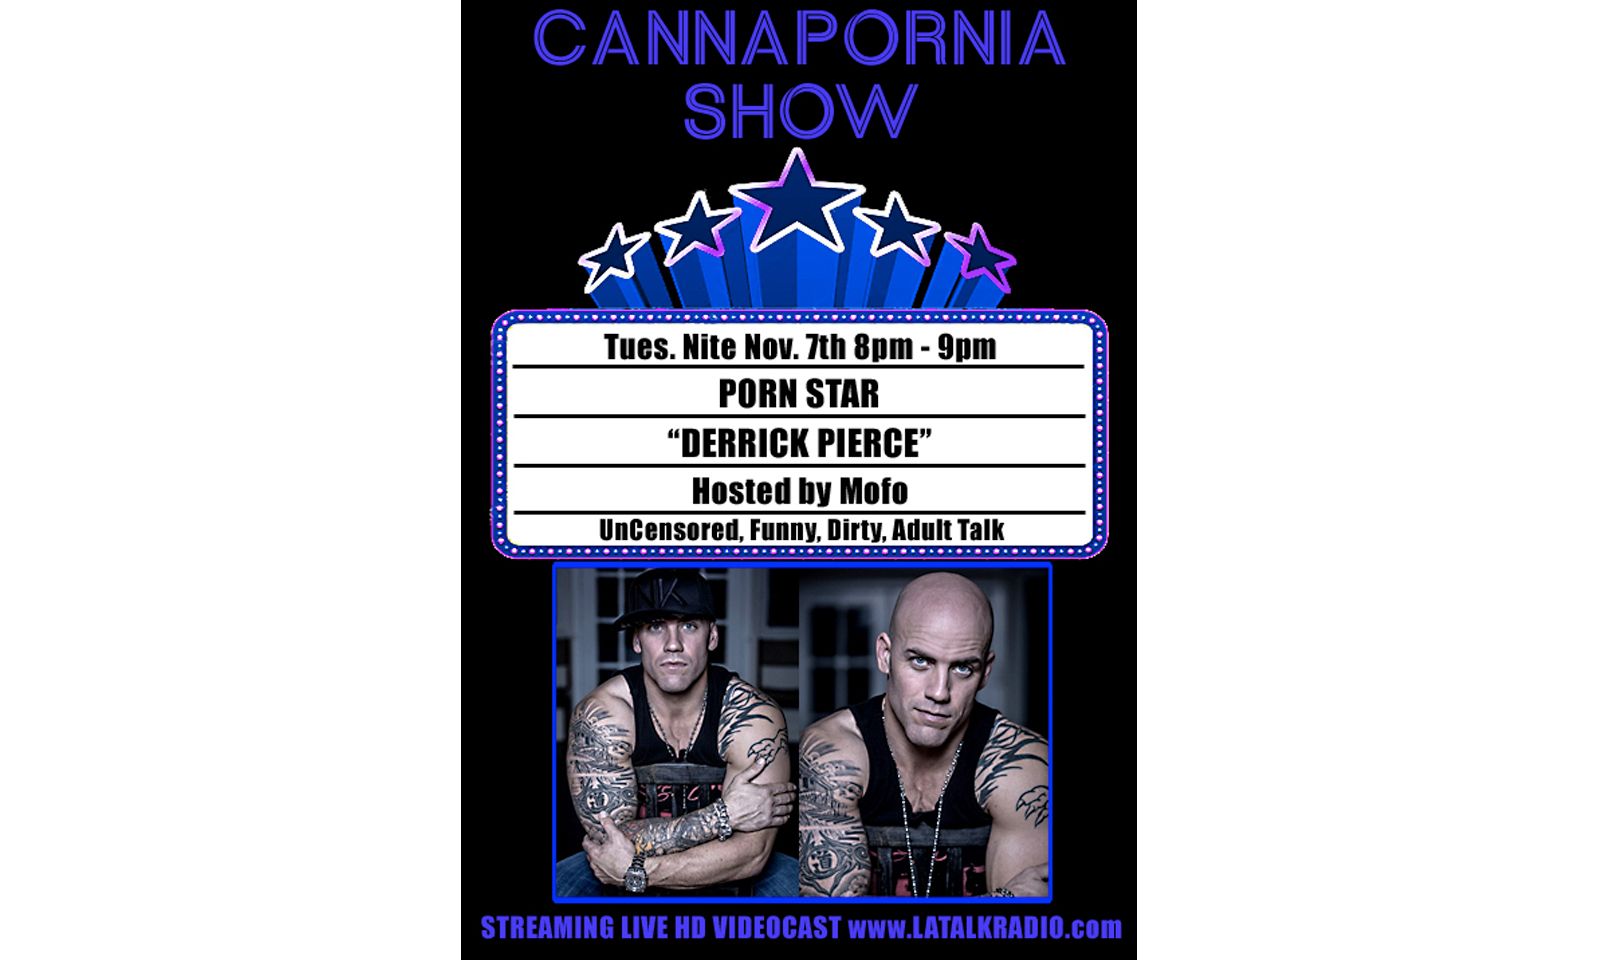 Derrick Pierce Guesting on CannaPornia Show